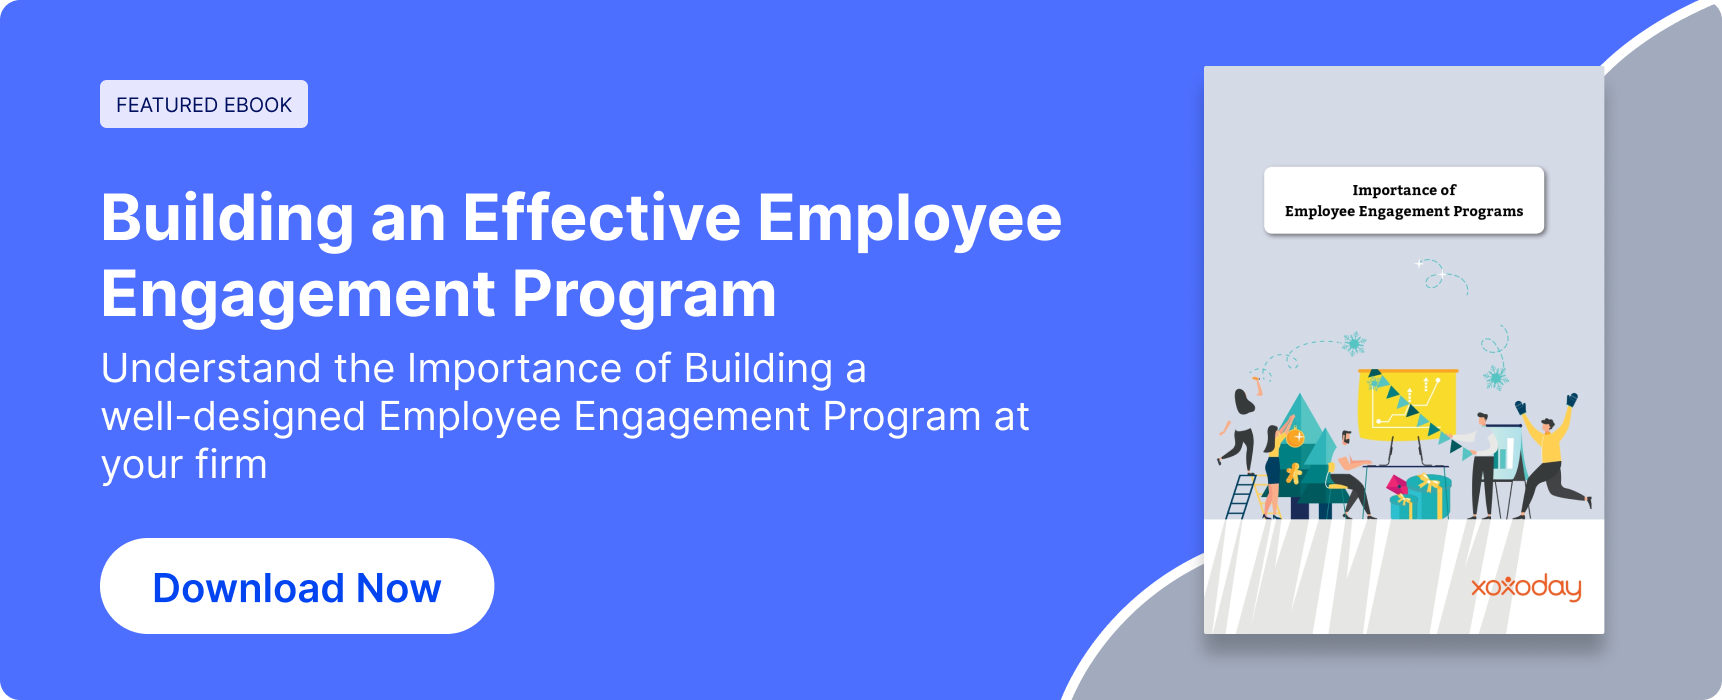 Why should organizations invest in a well-designed Employee Engagement Program?	